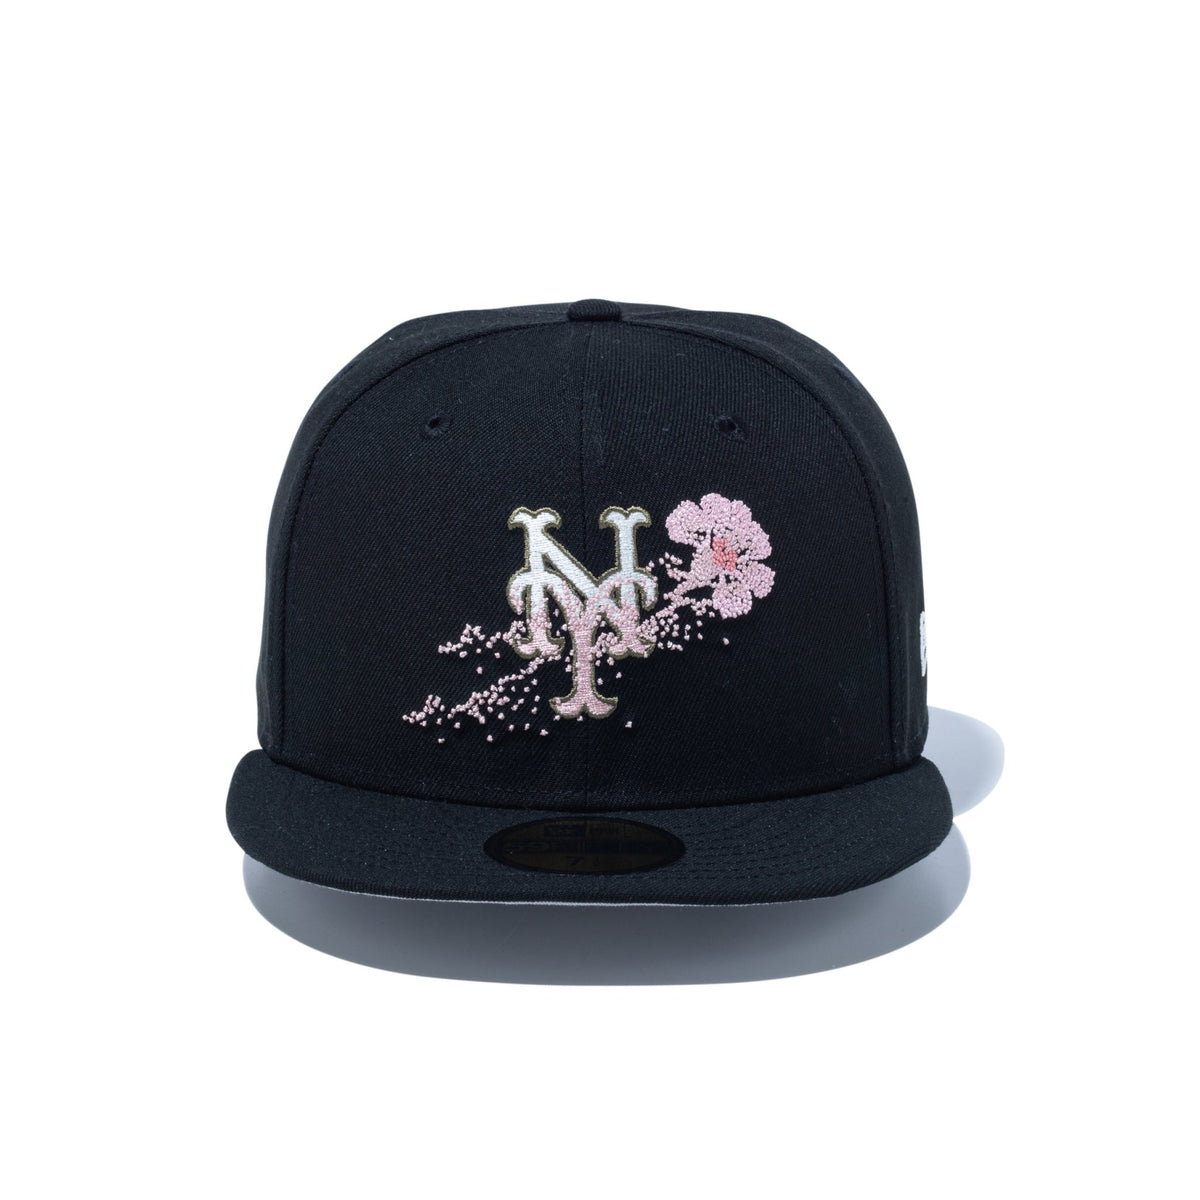 59FIFTY Dotted Floral ニューヨーク・メッツ ブラック | ニューエラ 